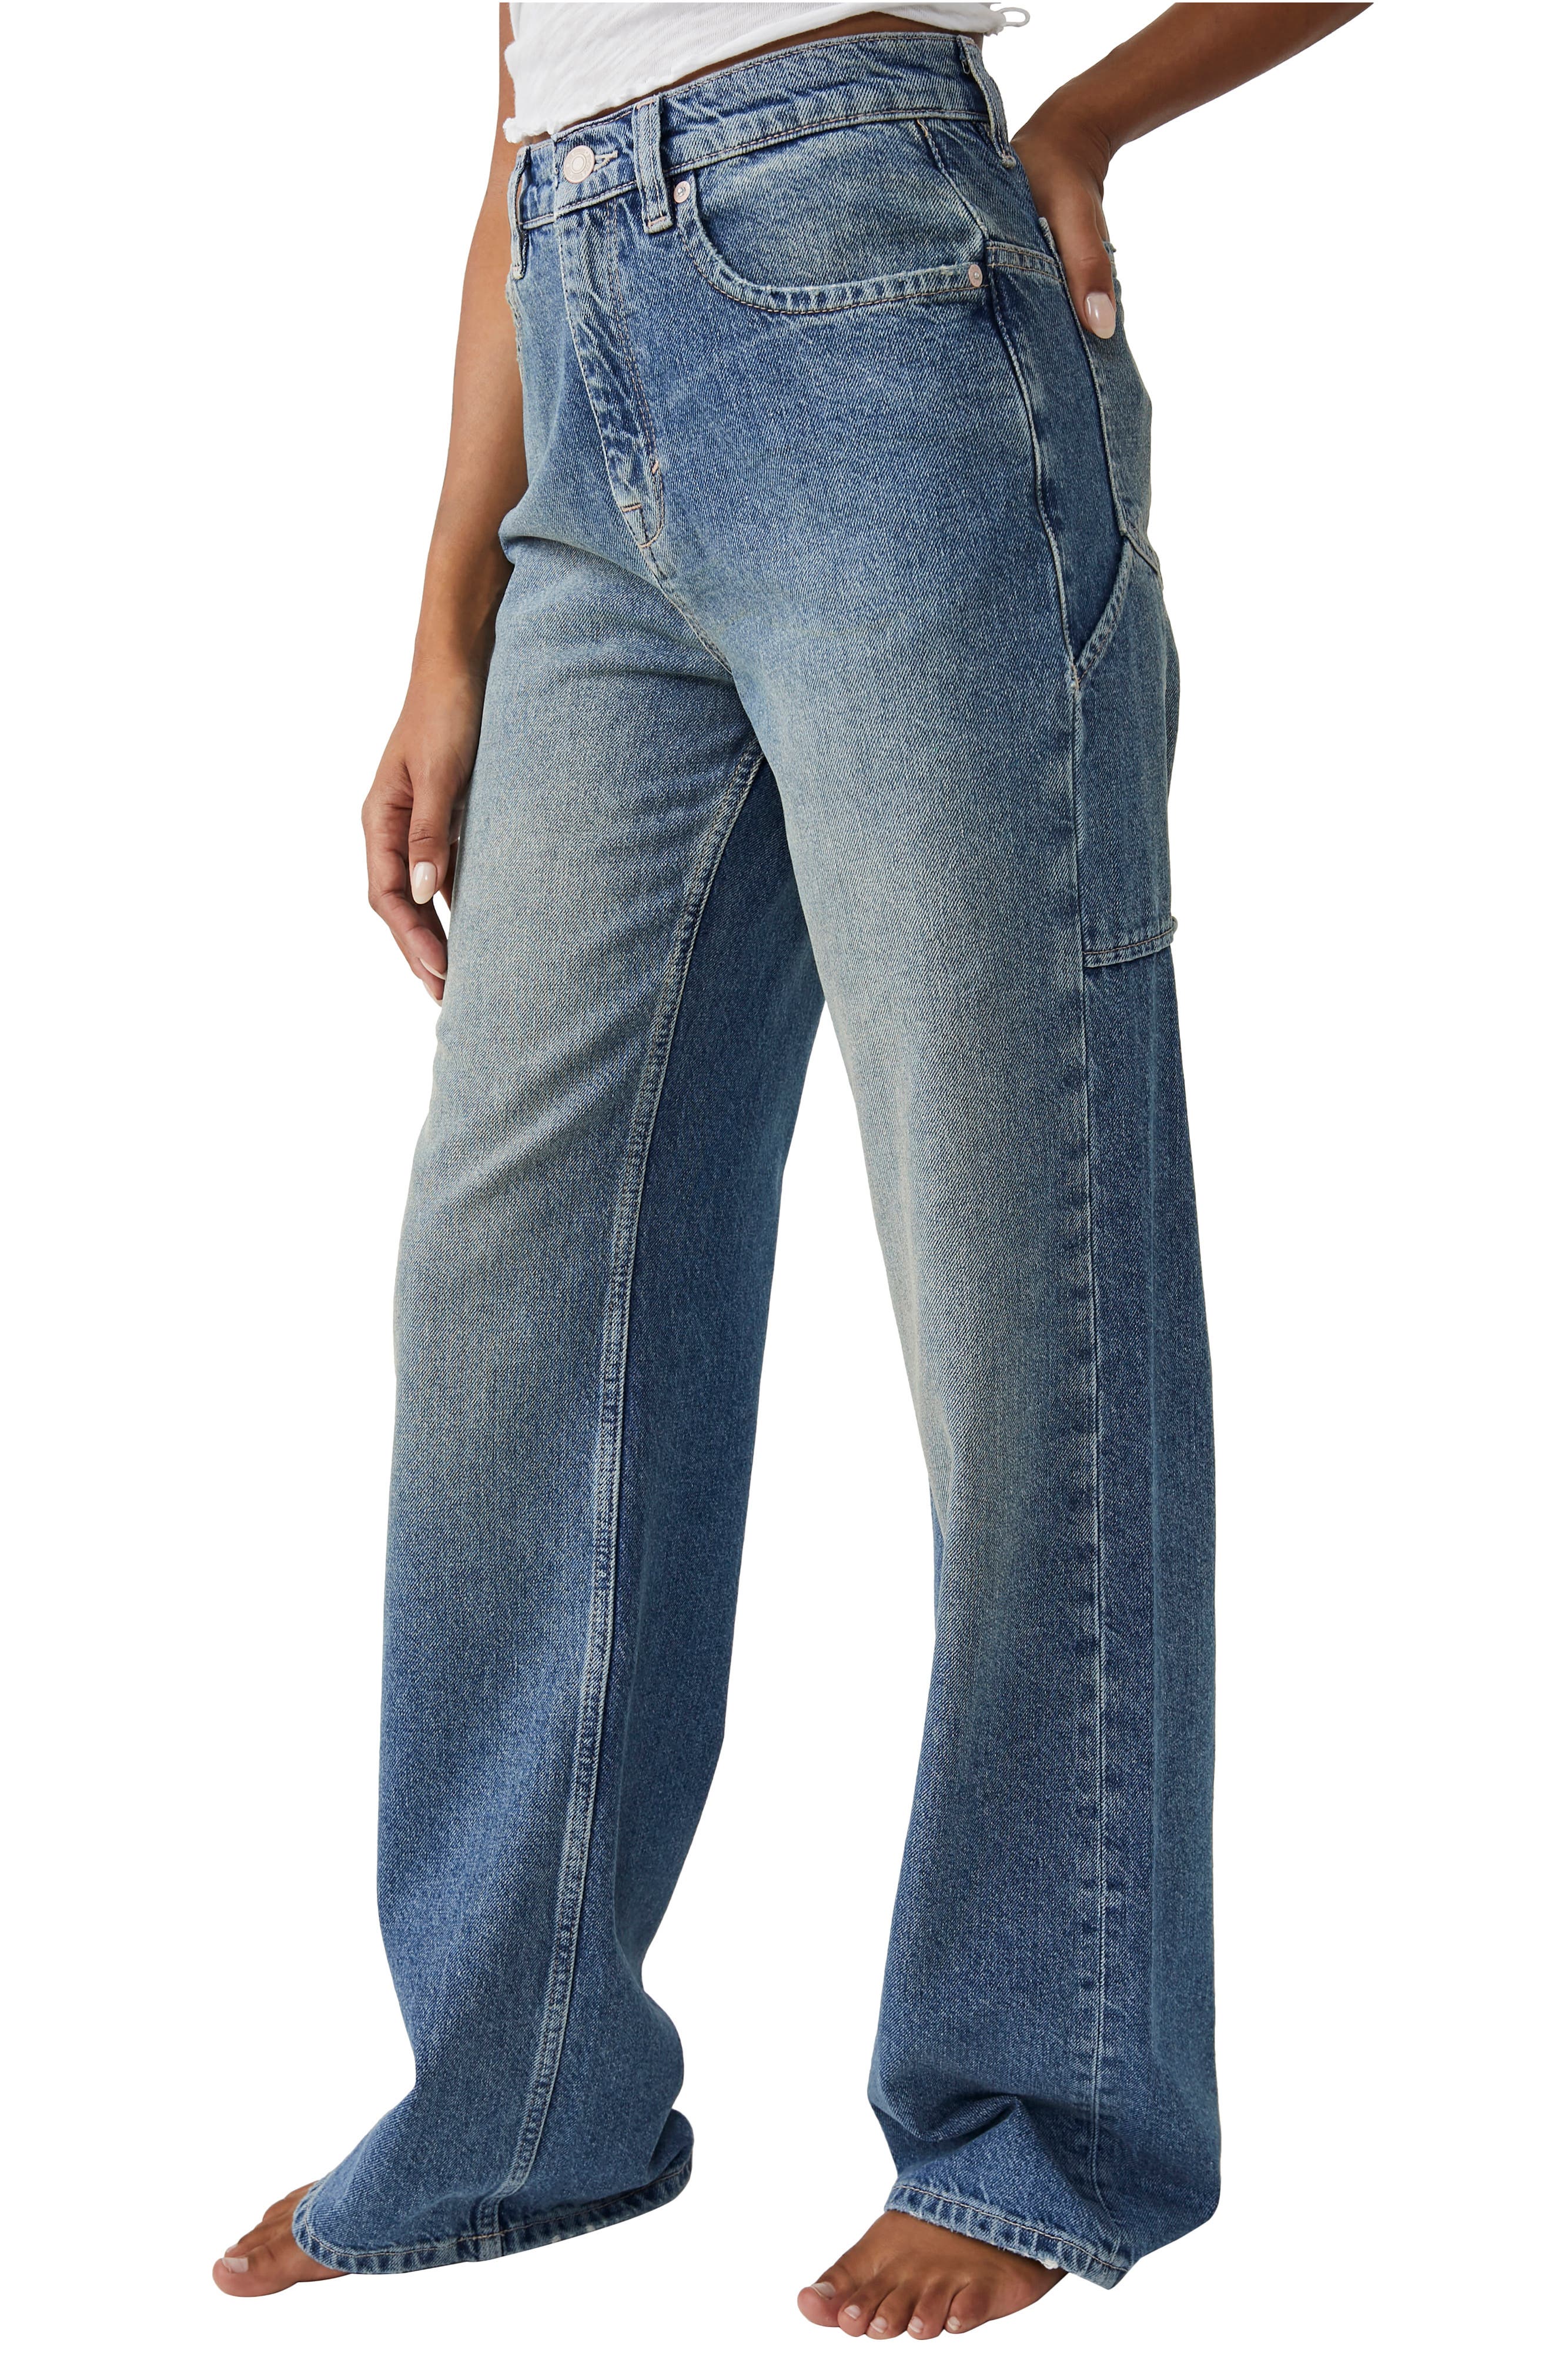 Free People + We the Free Tinsley High Waist Baggy Jeans